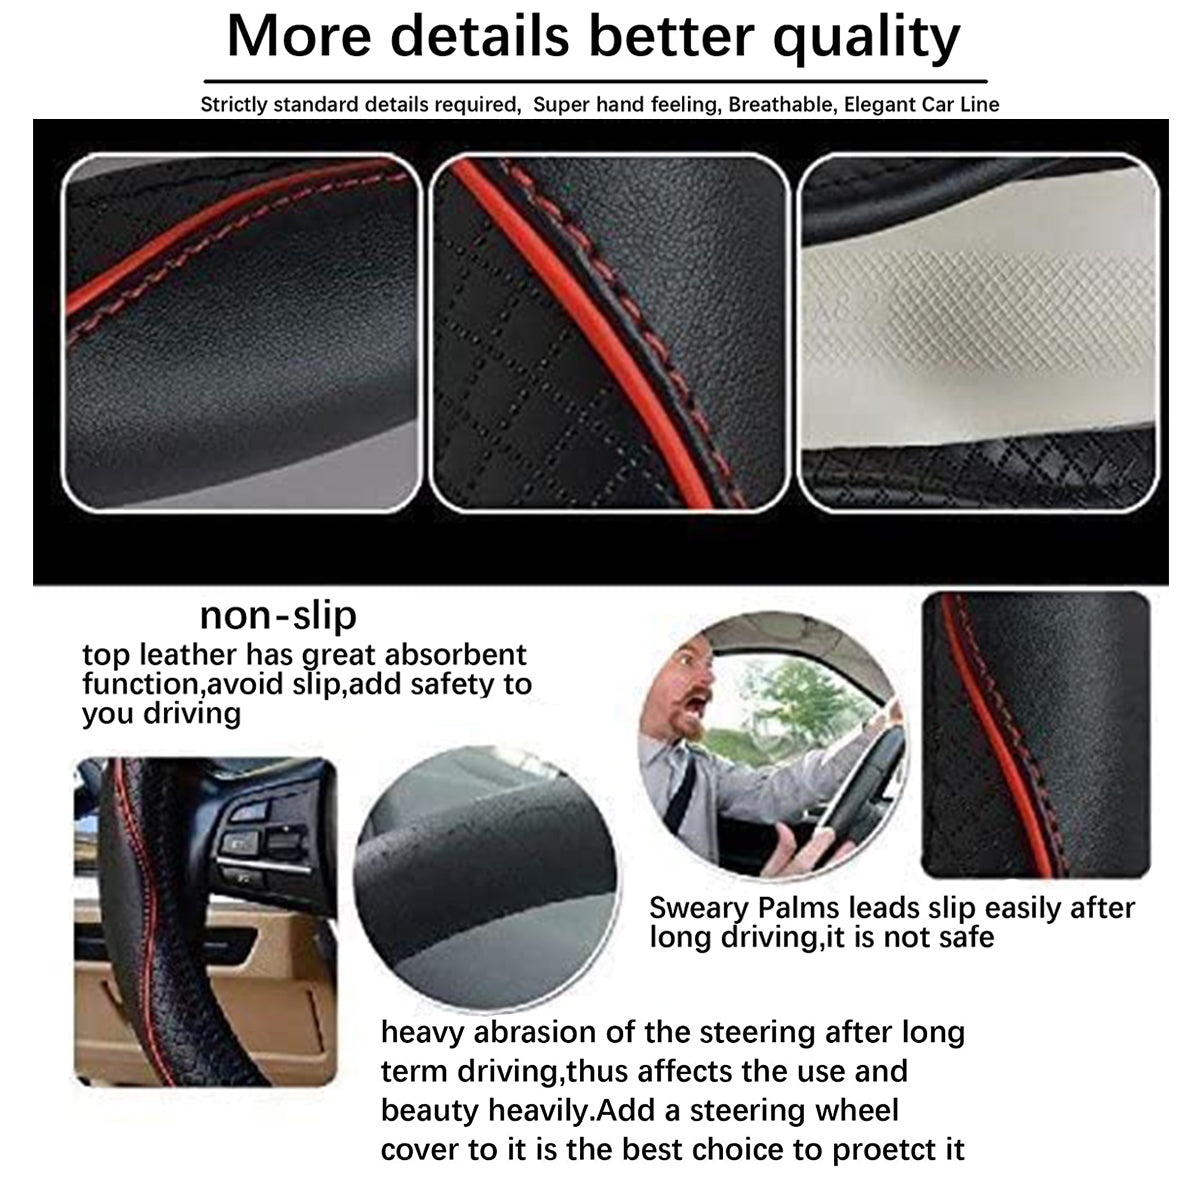 Car Steering Wheel Cover, Custom For Your Cars, Anti-Slip, Safety, Soft, Breathable, Heavy Duty, Thick, Full Surround, Sports Style, Car Accessories CA18990